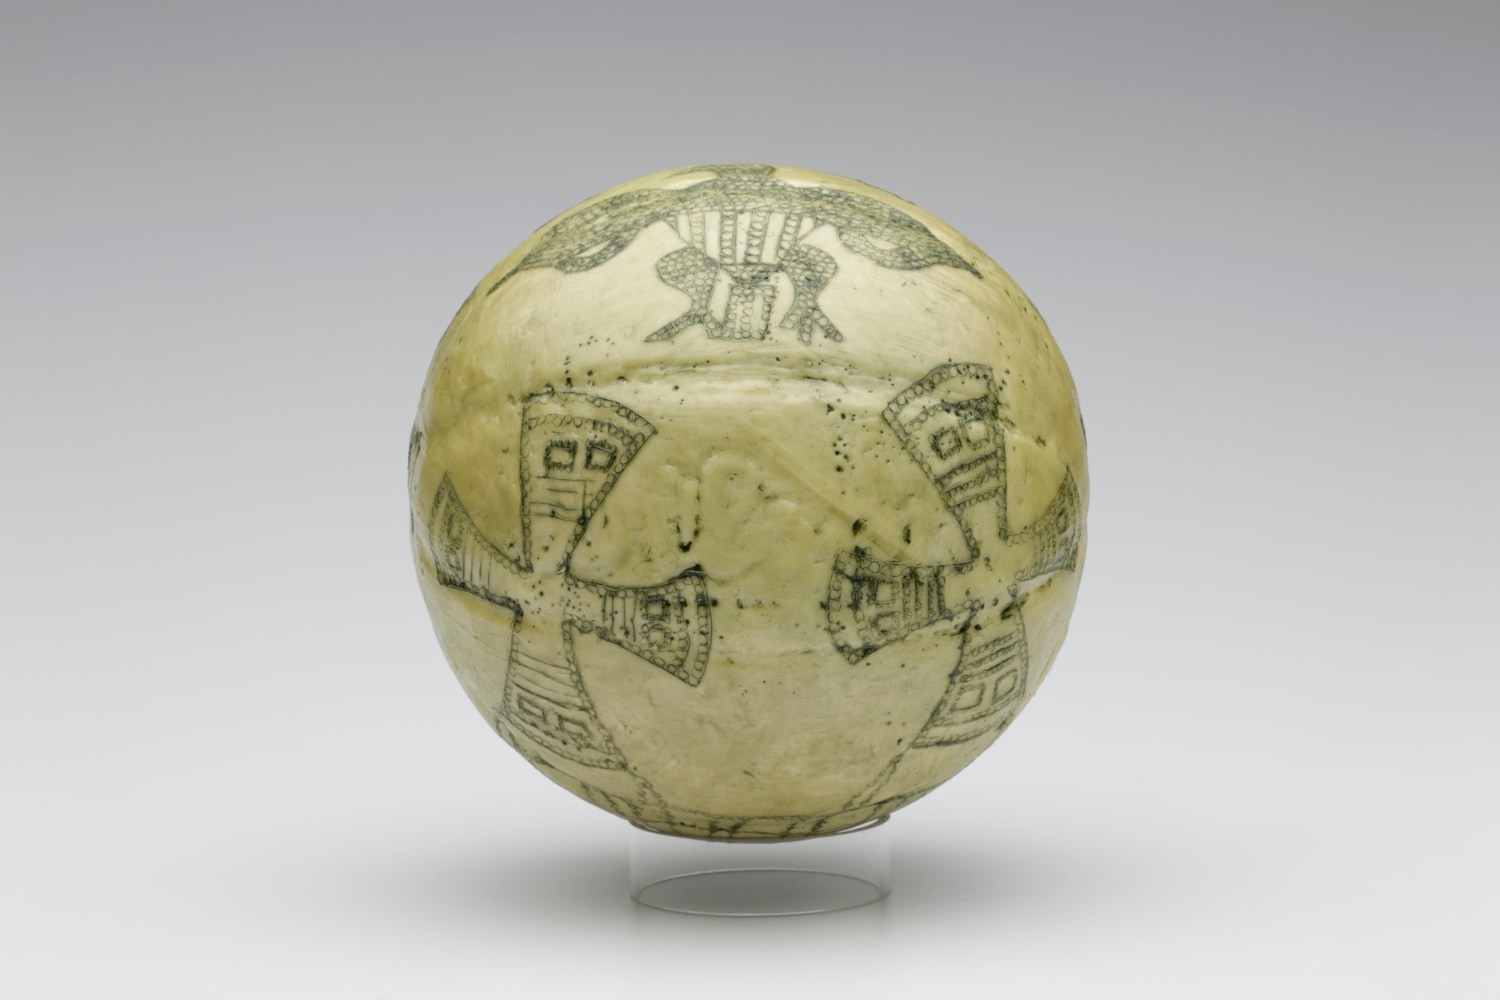 Gina Adams
Honoring Modern Spirit Remains 14, 2015
Oil and encaustic on ceramic
9 inches round
Courtesy of the Artist and Fort Gansevoort